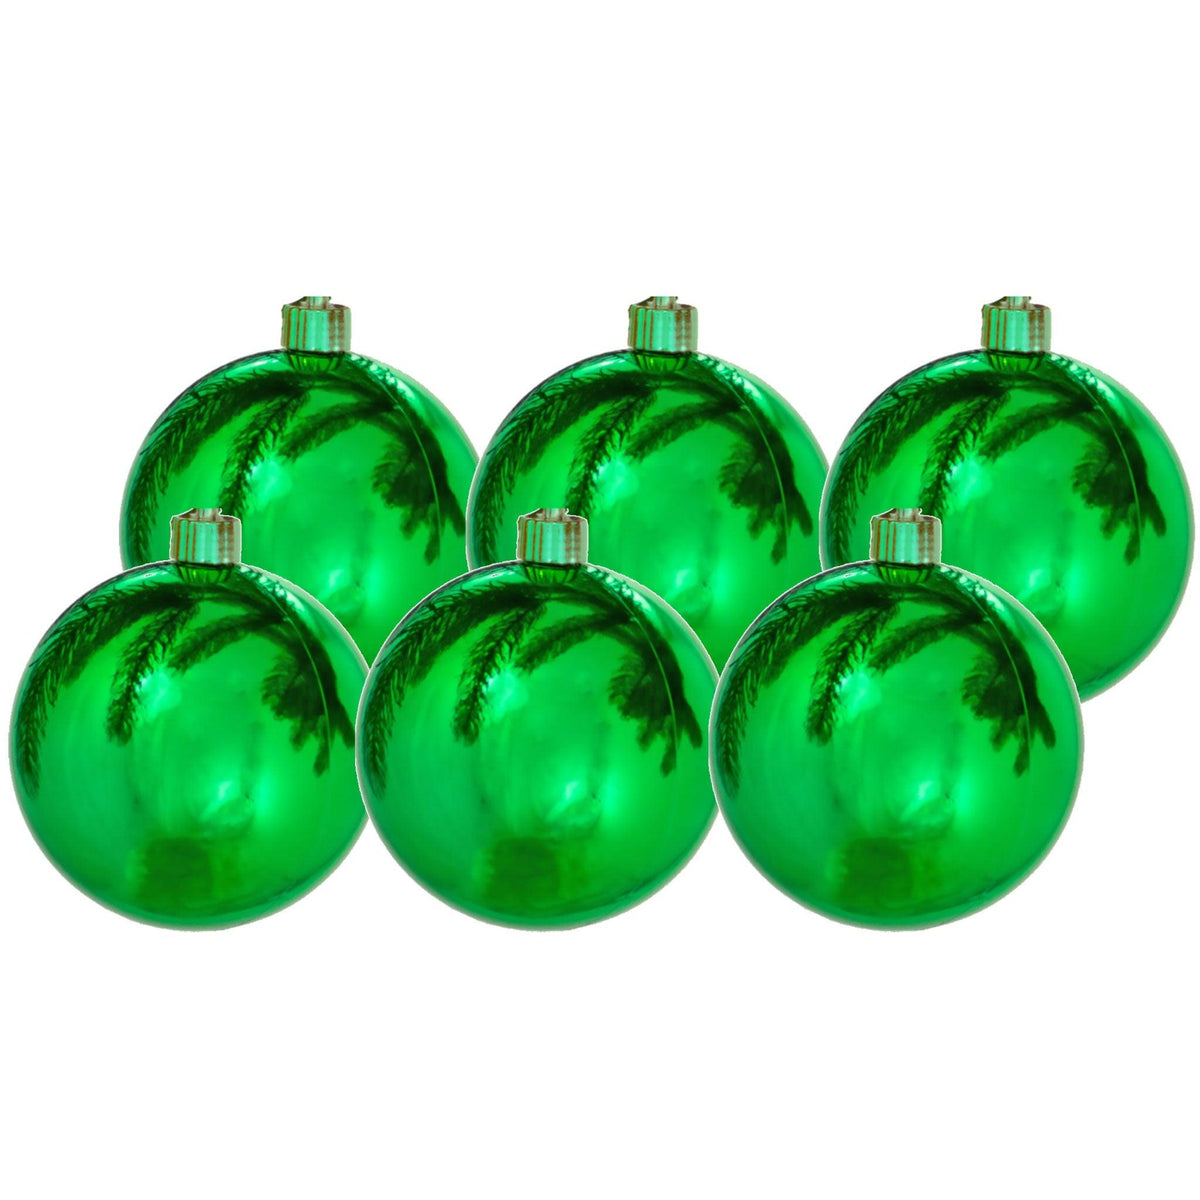 Lee Display offers brand new Shiny Green Plastic Ball Ornaments at wholesale prices for affordable Christmas Tree Hanging and Holiday Decorating on sale at leedisplay.com